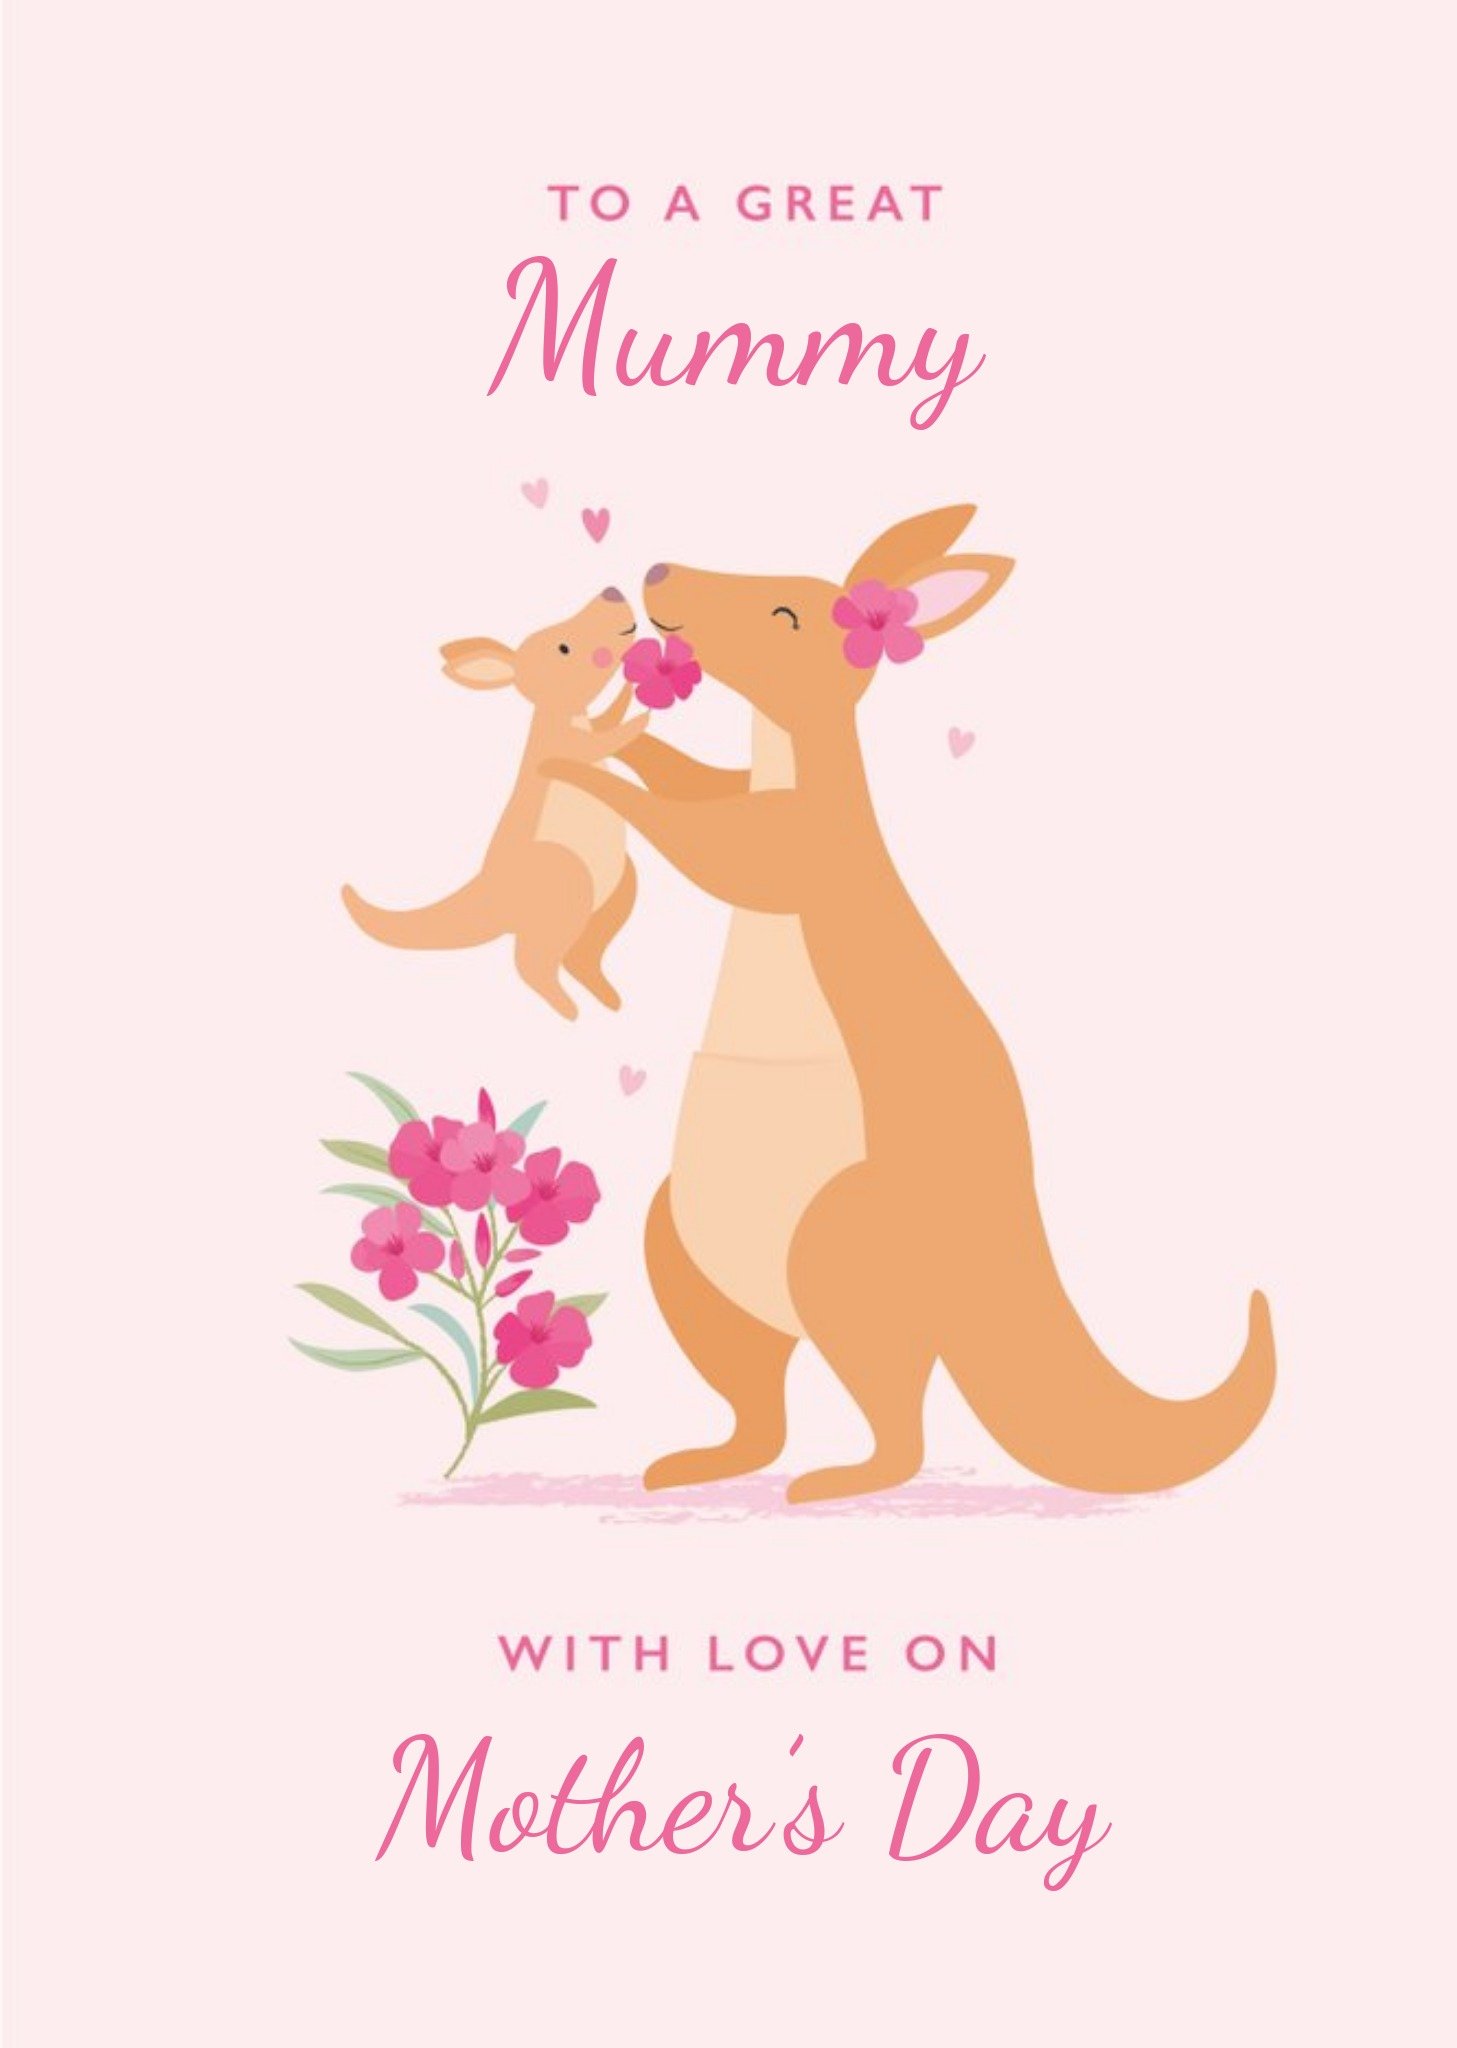 Moonpig Cute Illustration Of A Kangeroo With A Joey On A Pink Background Mother's Day Card Ecard